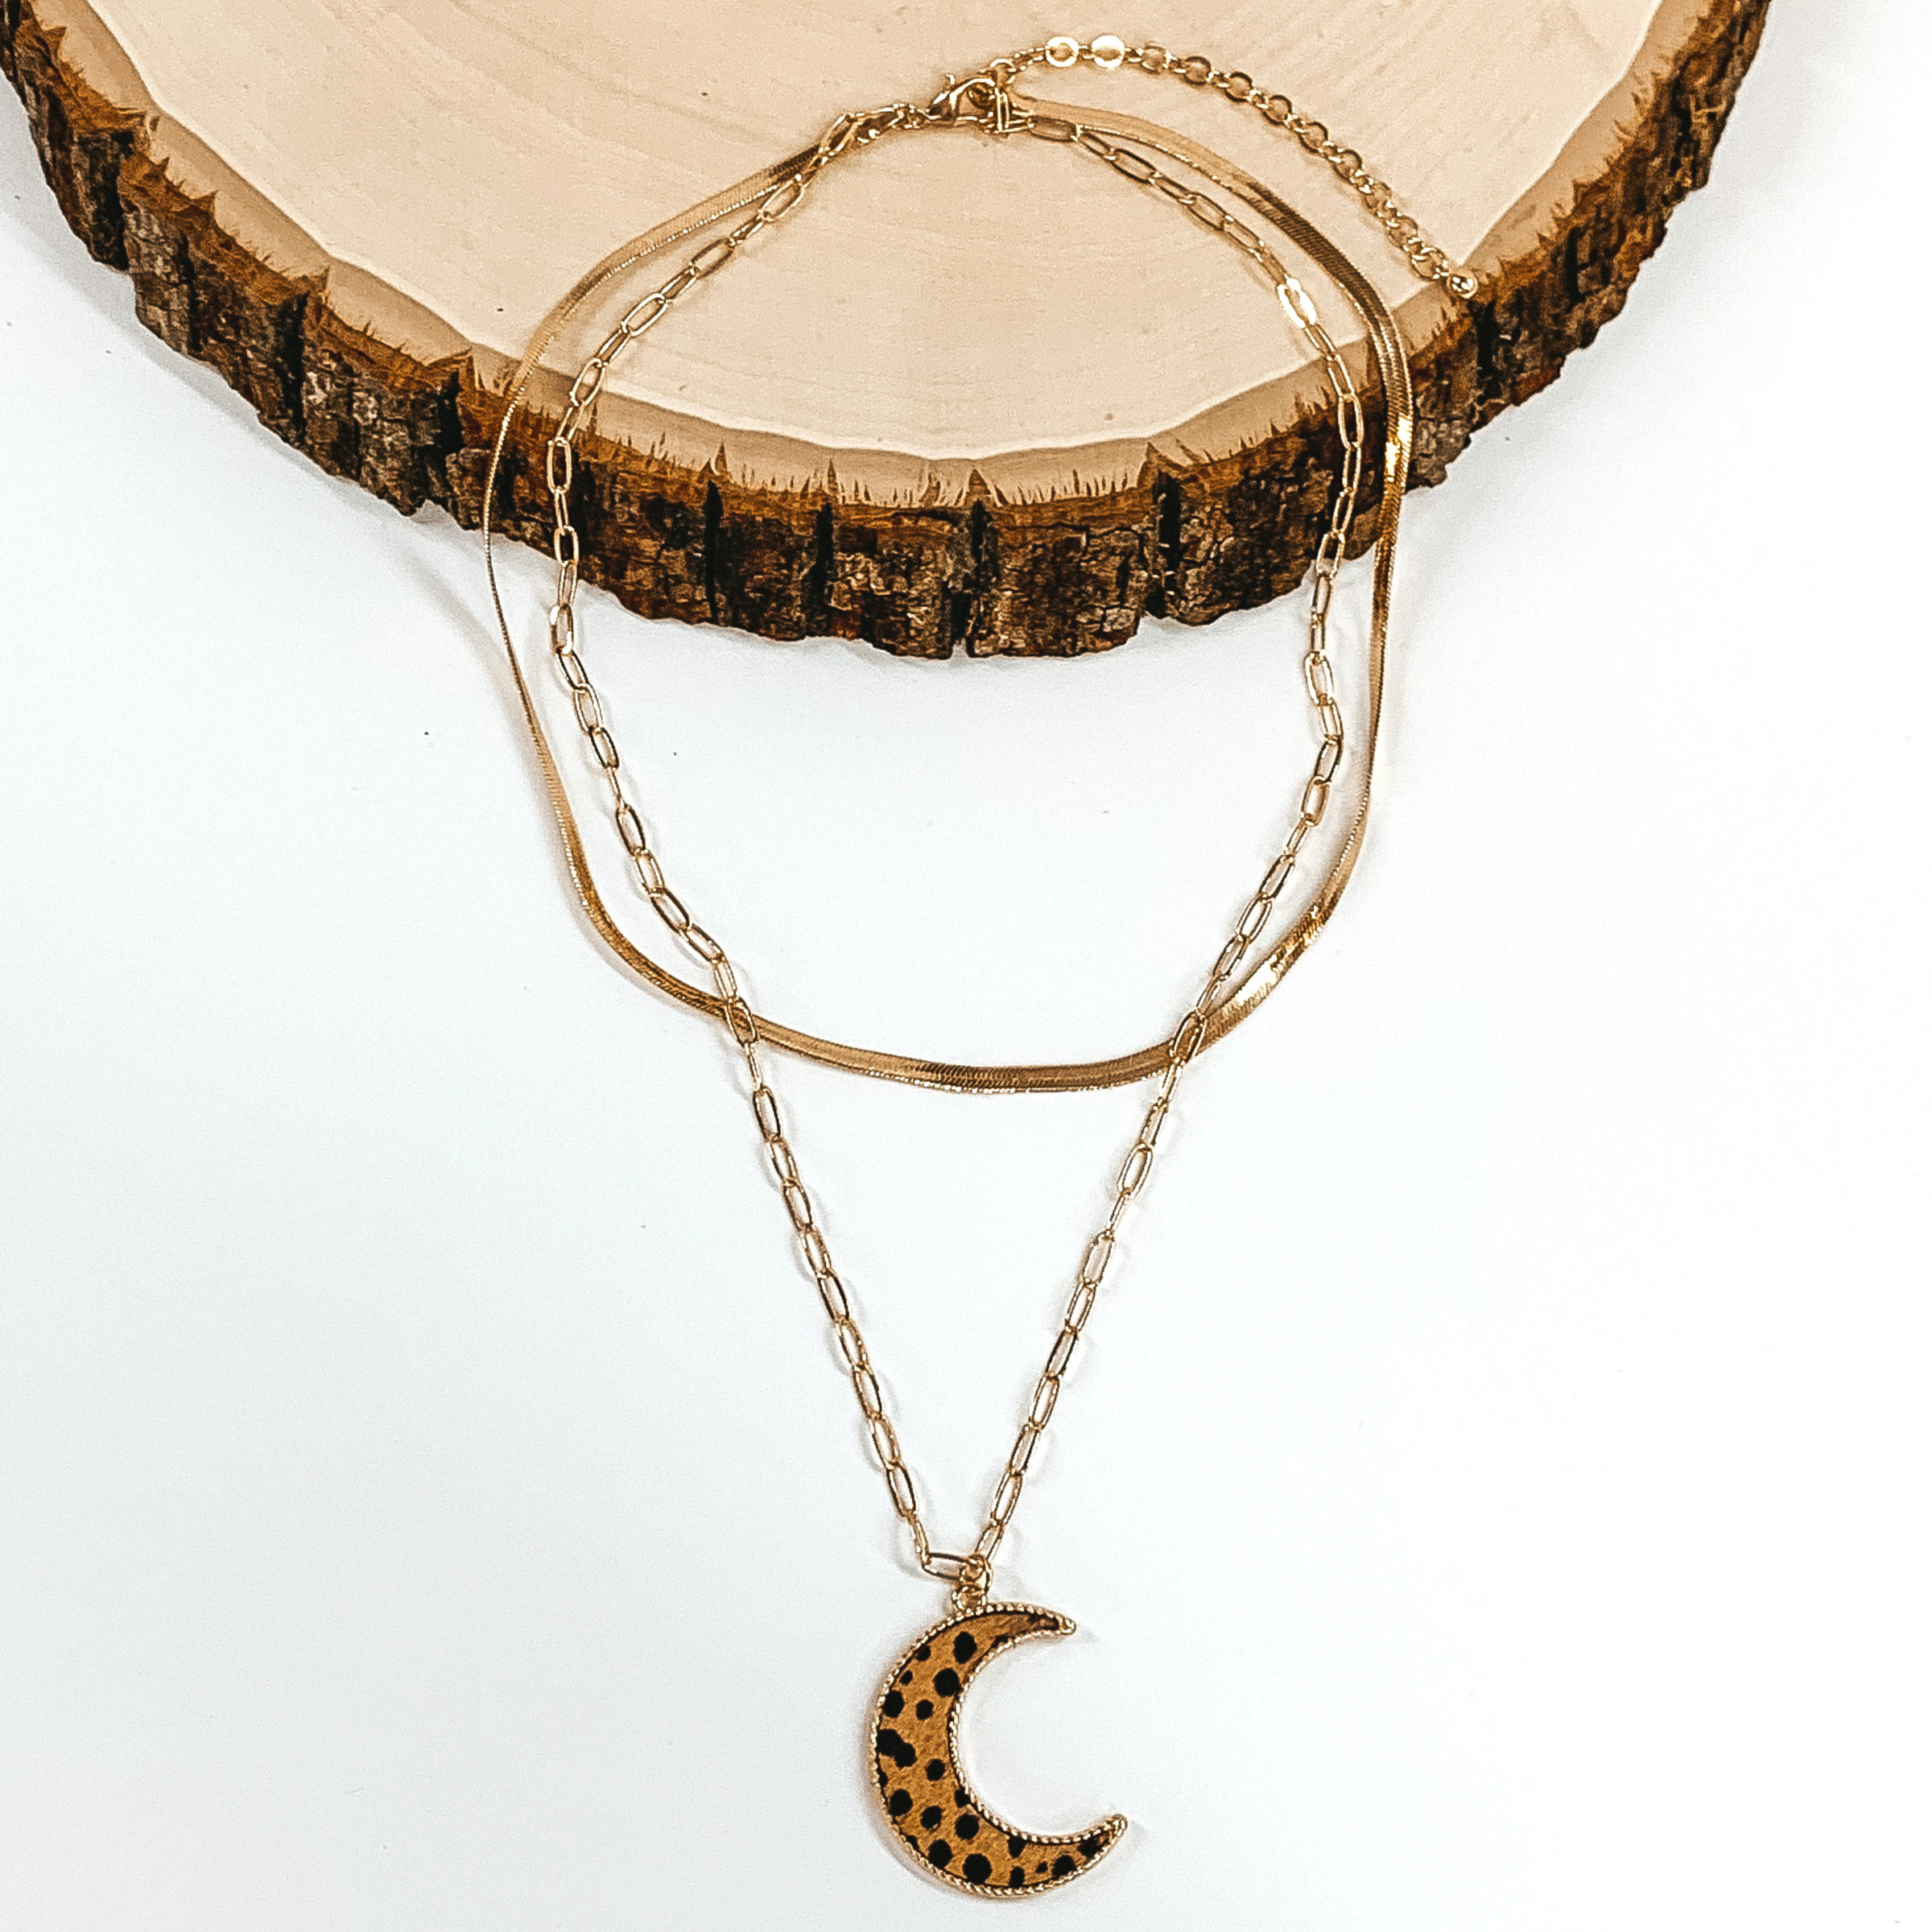 Gold paperclip doubled chain with an moon pendant. The pendant has a brown hide inlay with a dotted print. This necklace is pictured laying on a piece of wood on a white background.